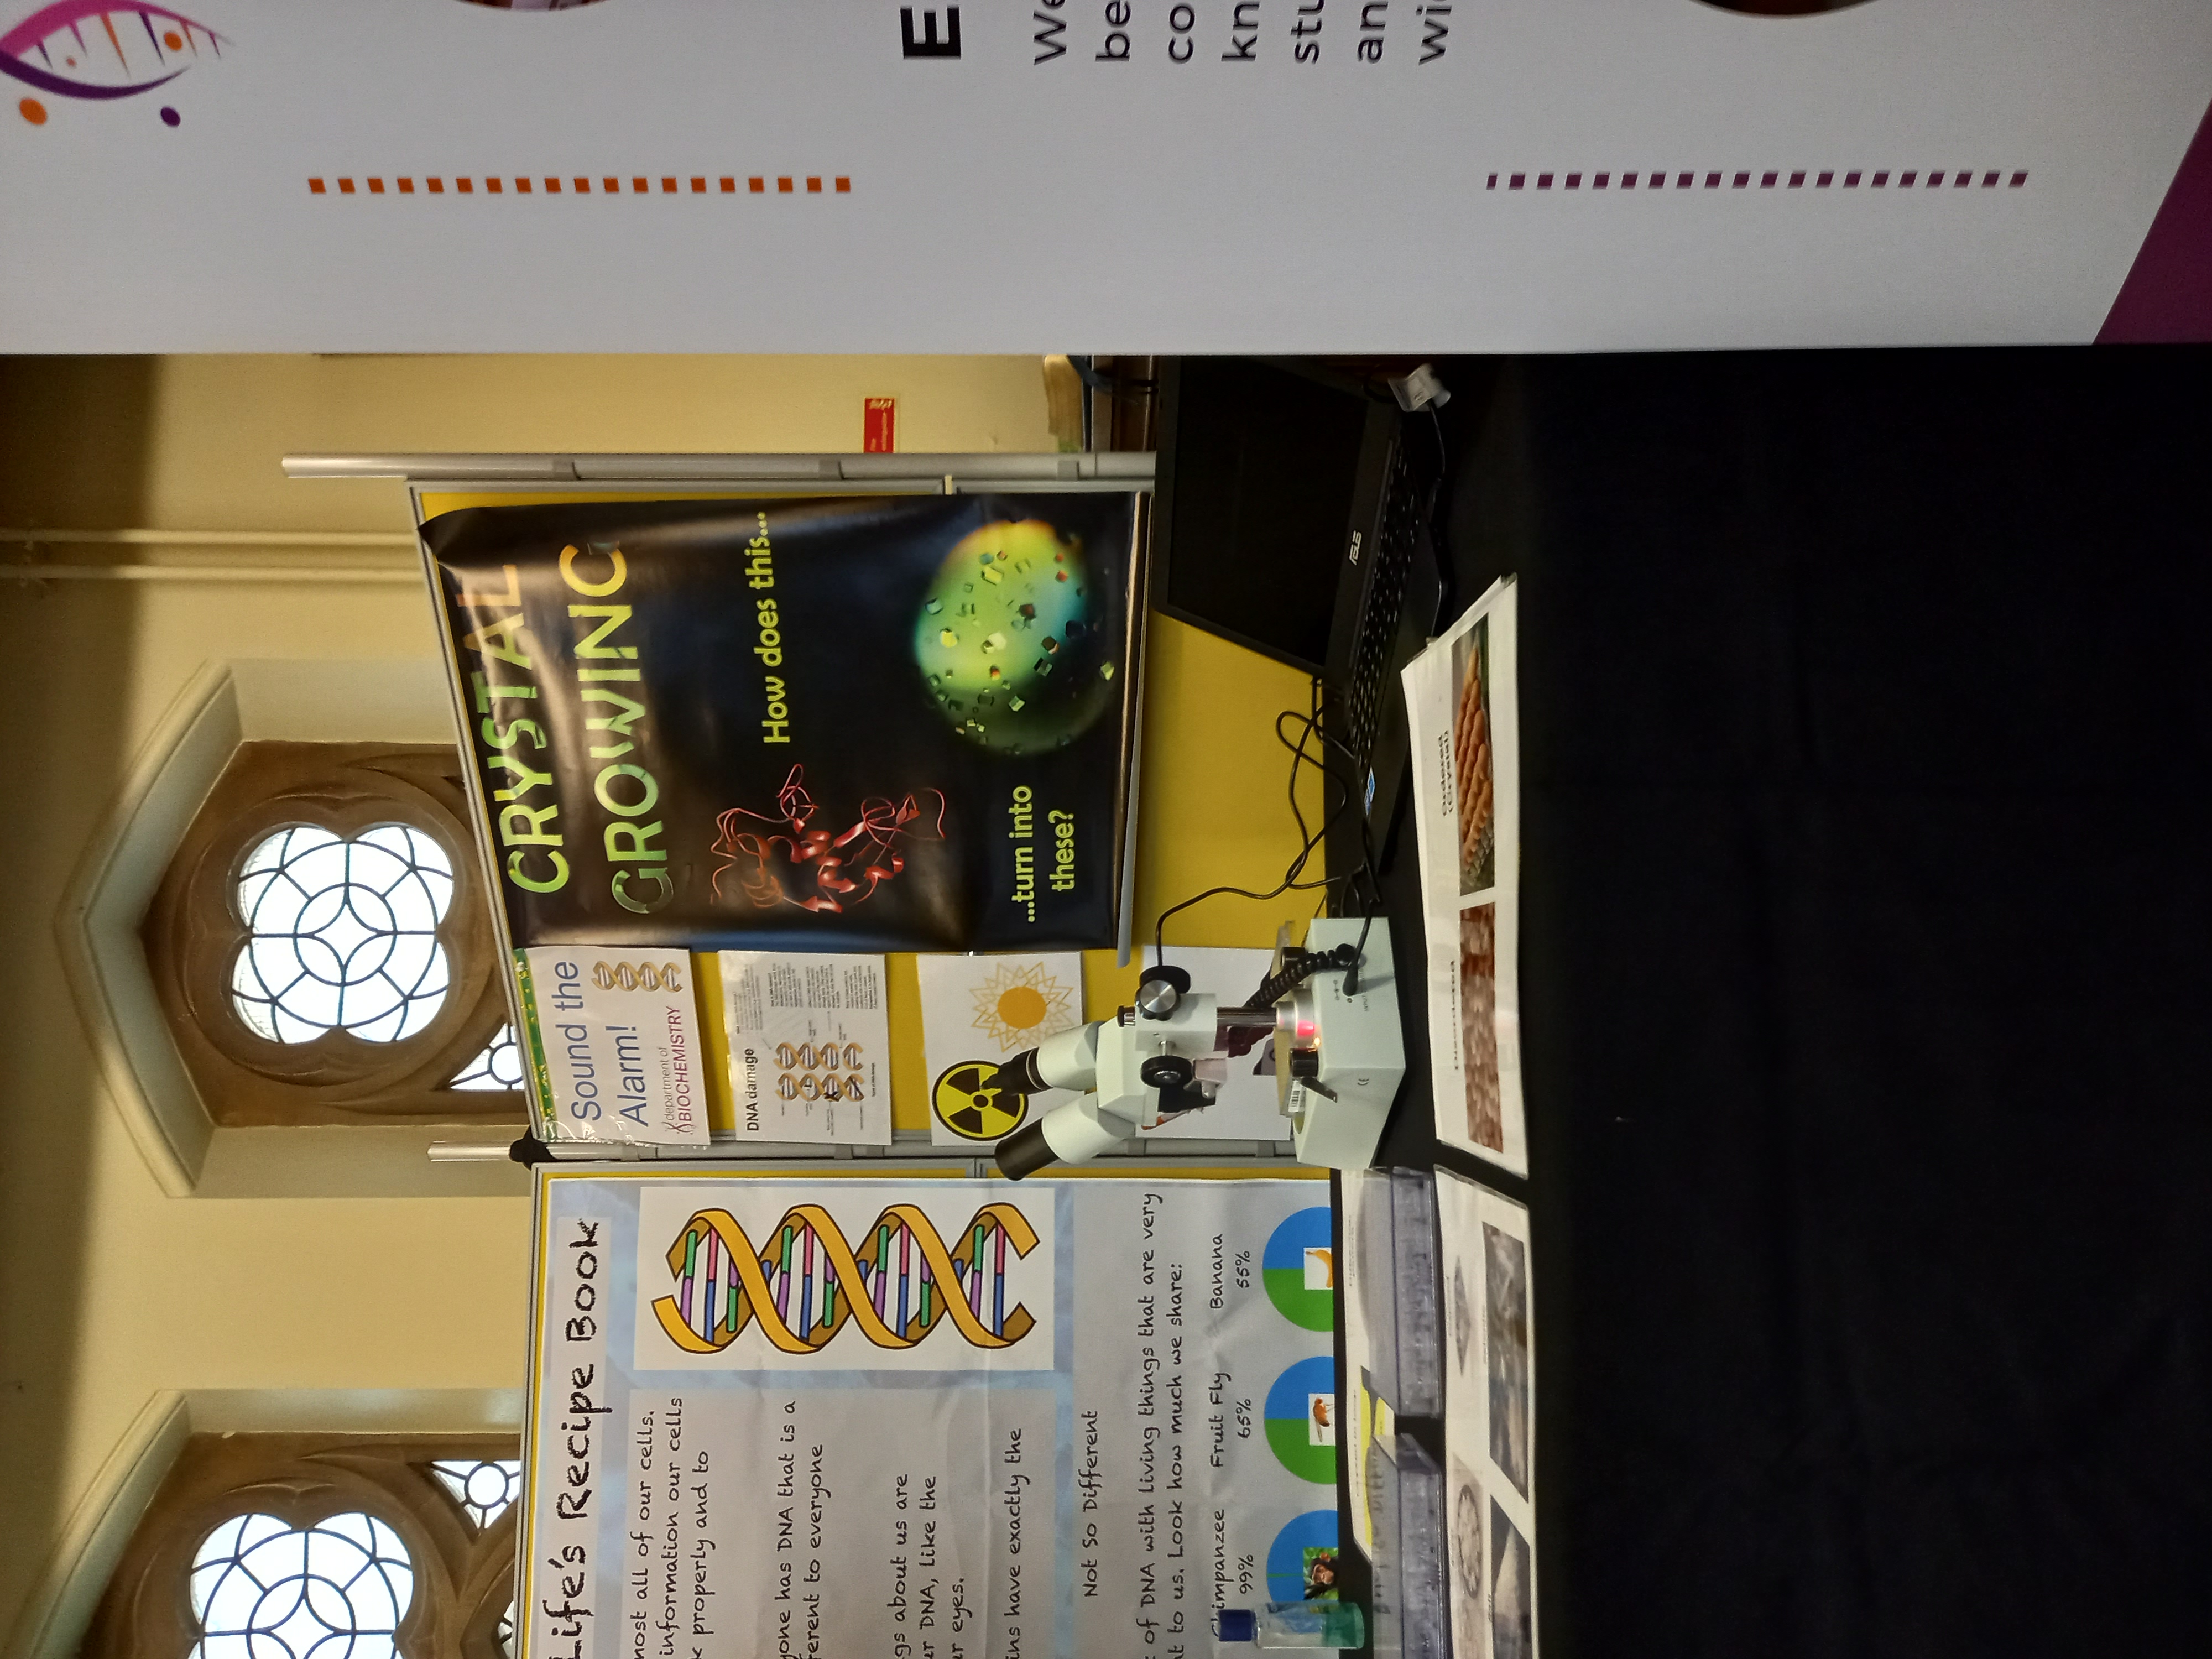 The Biochemistry stall at the Oxford IF Festival